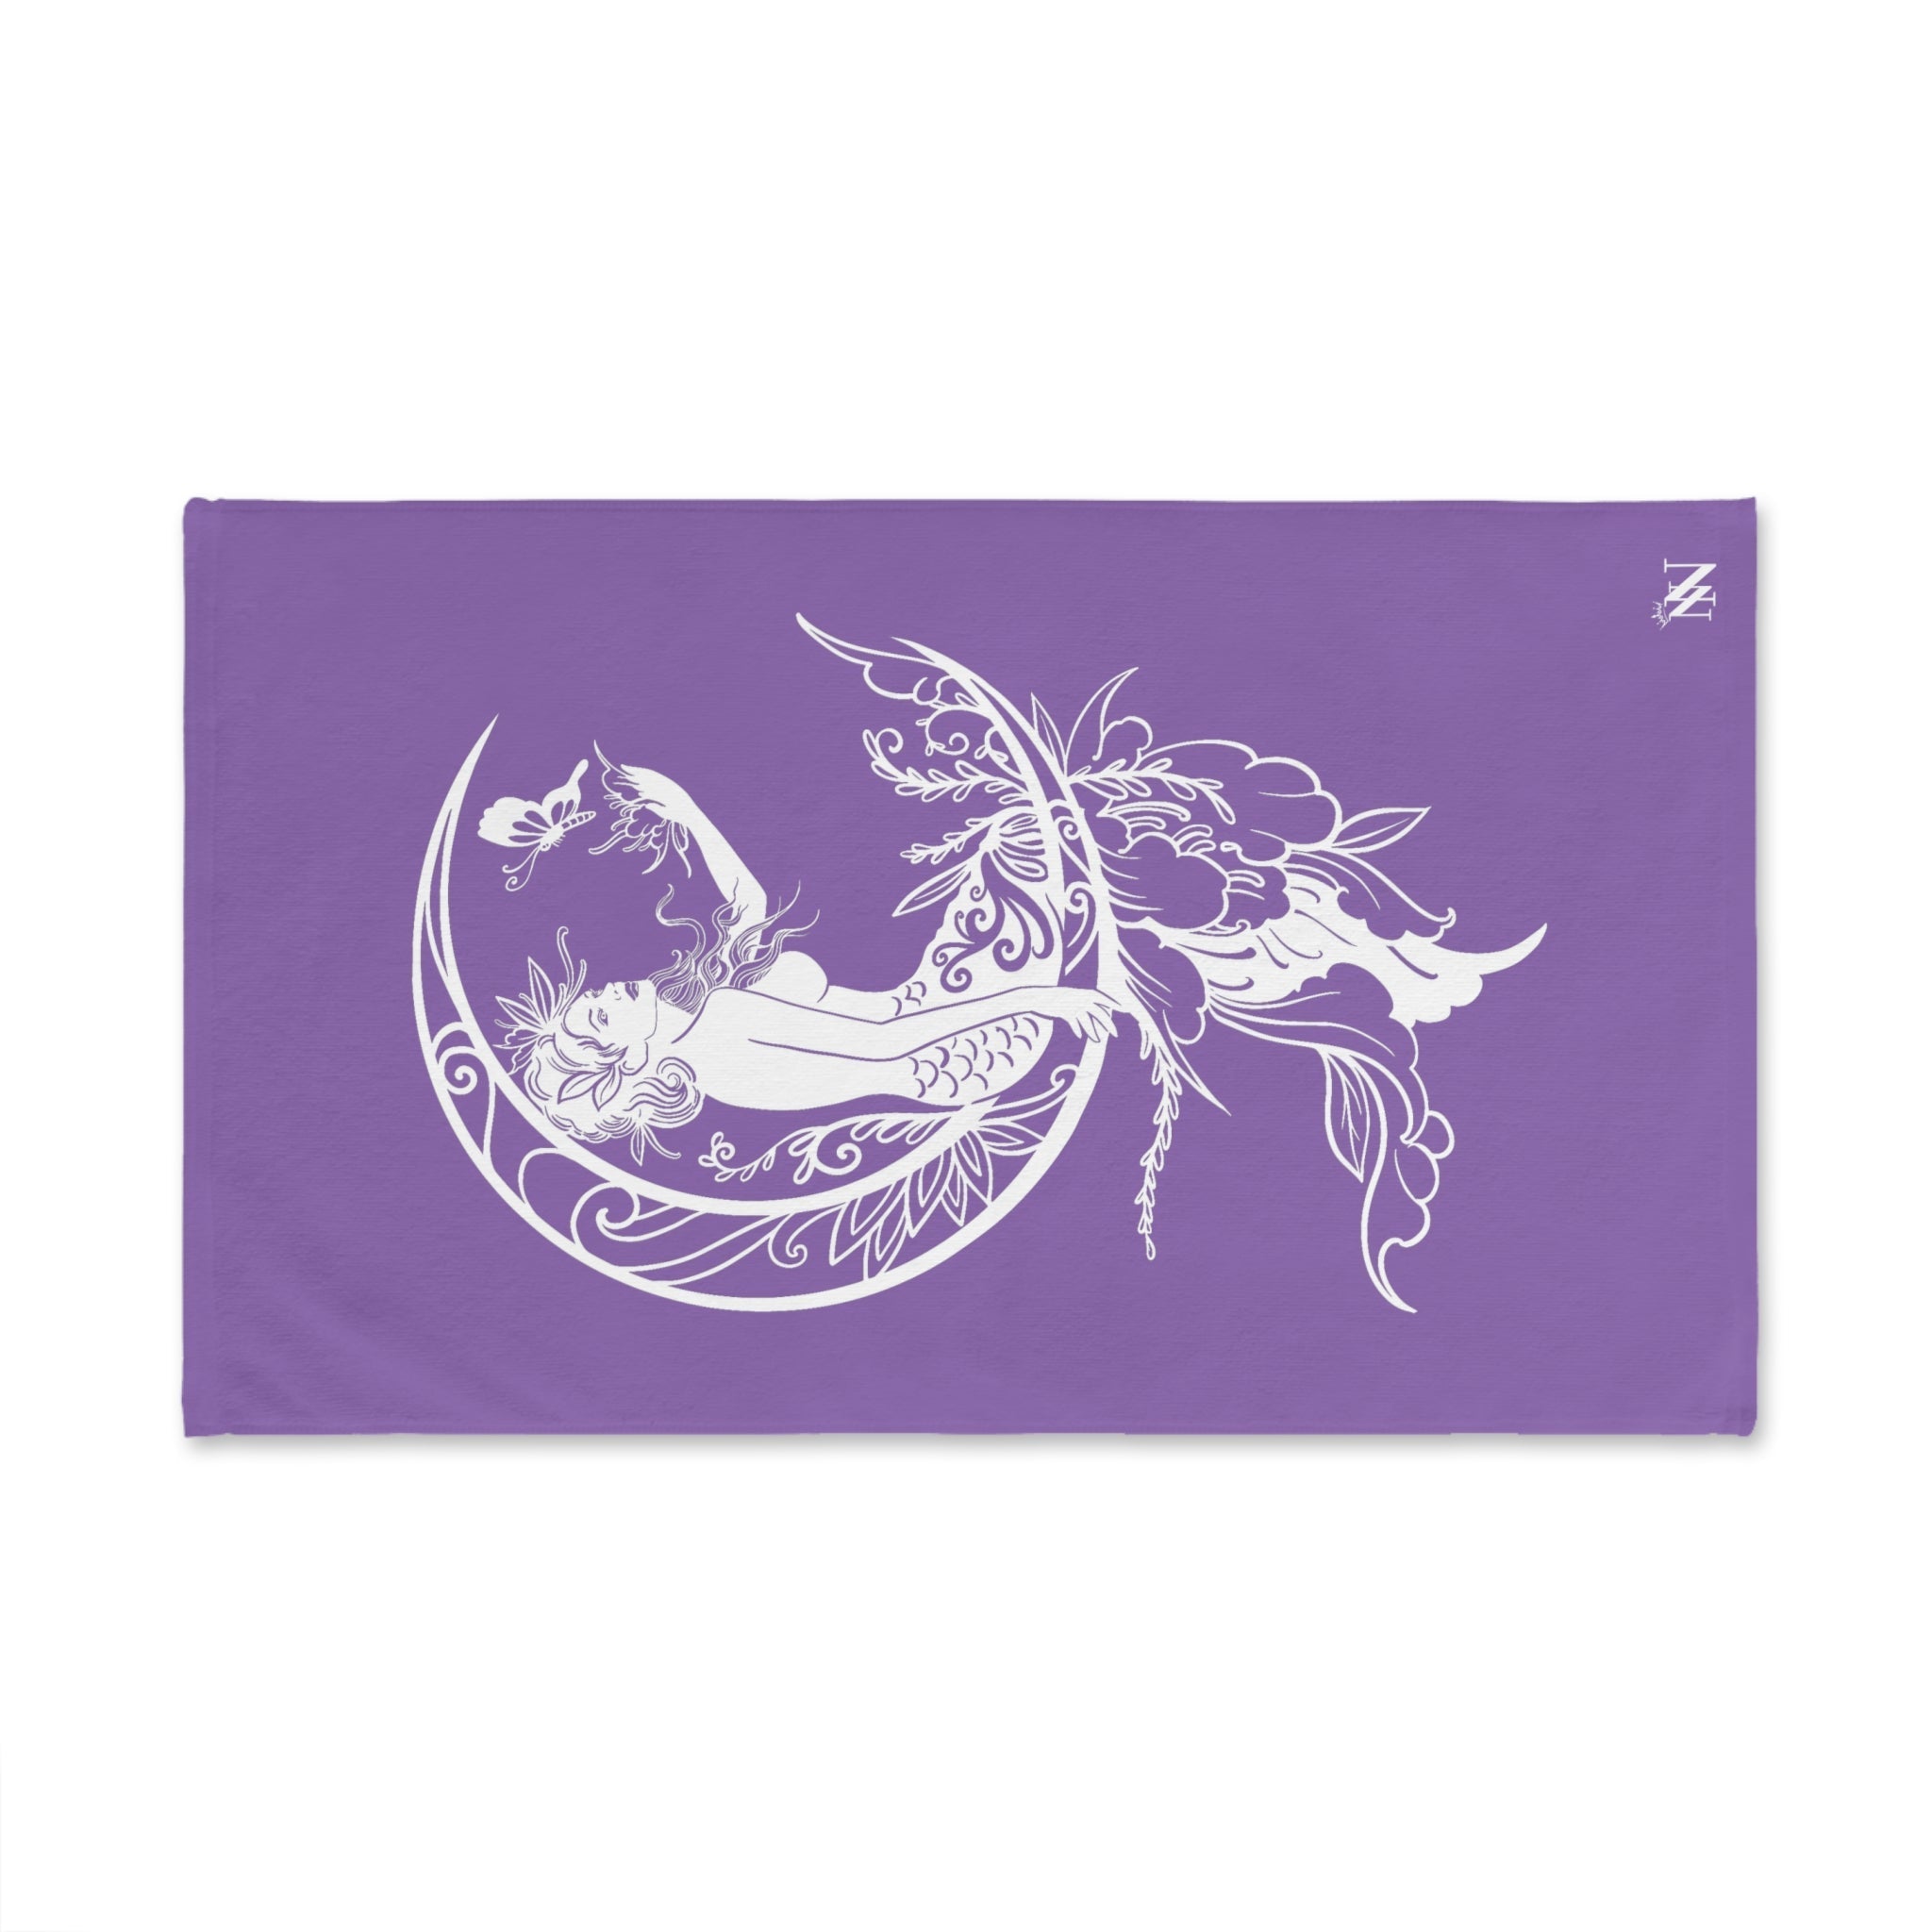 Moon Mermaid Star Lavendar | Funny Gifts for Men - Gifts for Him - Birthday Gifts for Men, Him, Husband, Boyfriend, New Couple Gifts, Fathers & Valentines Day Gifts, Hand Towels NECTAR NAPKINS